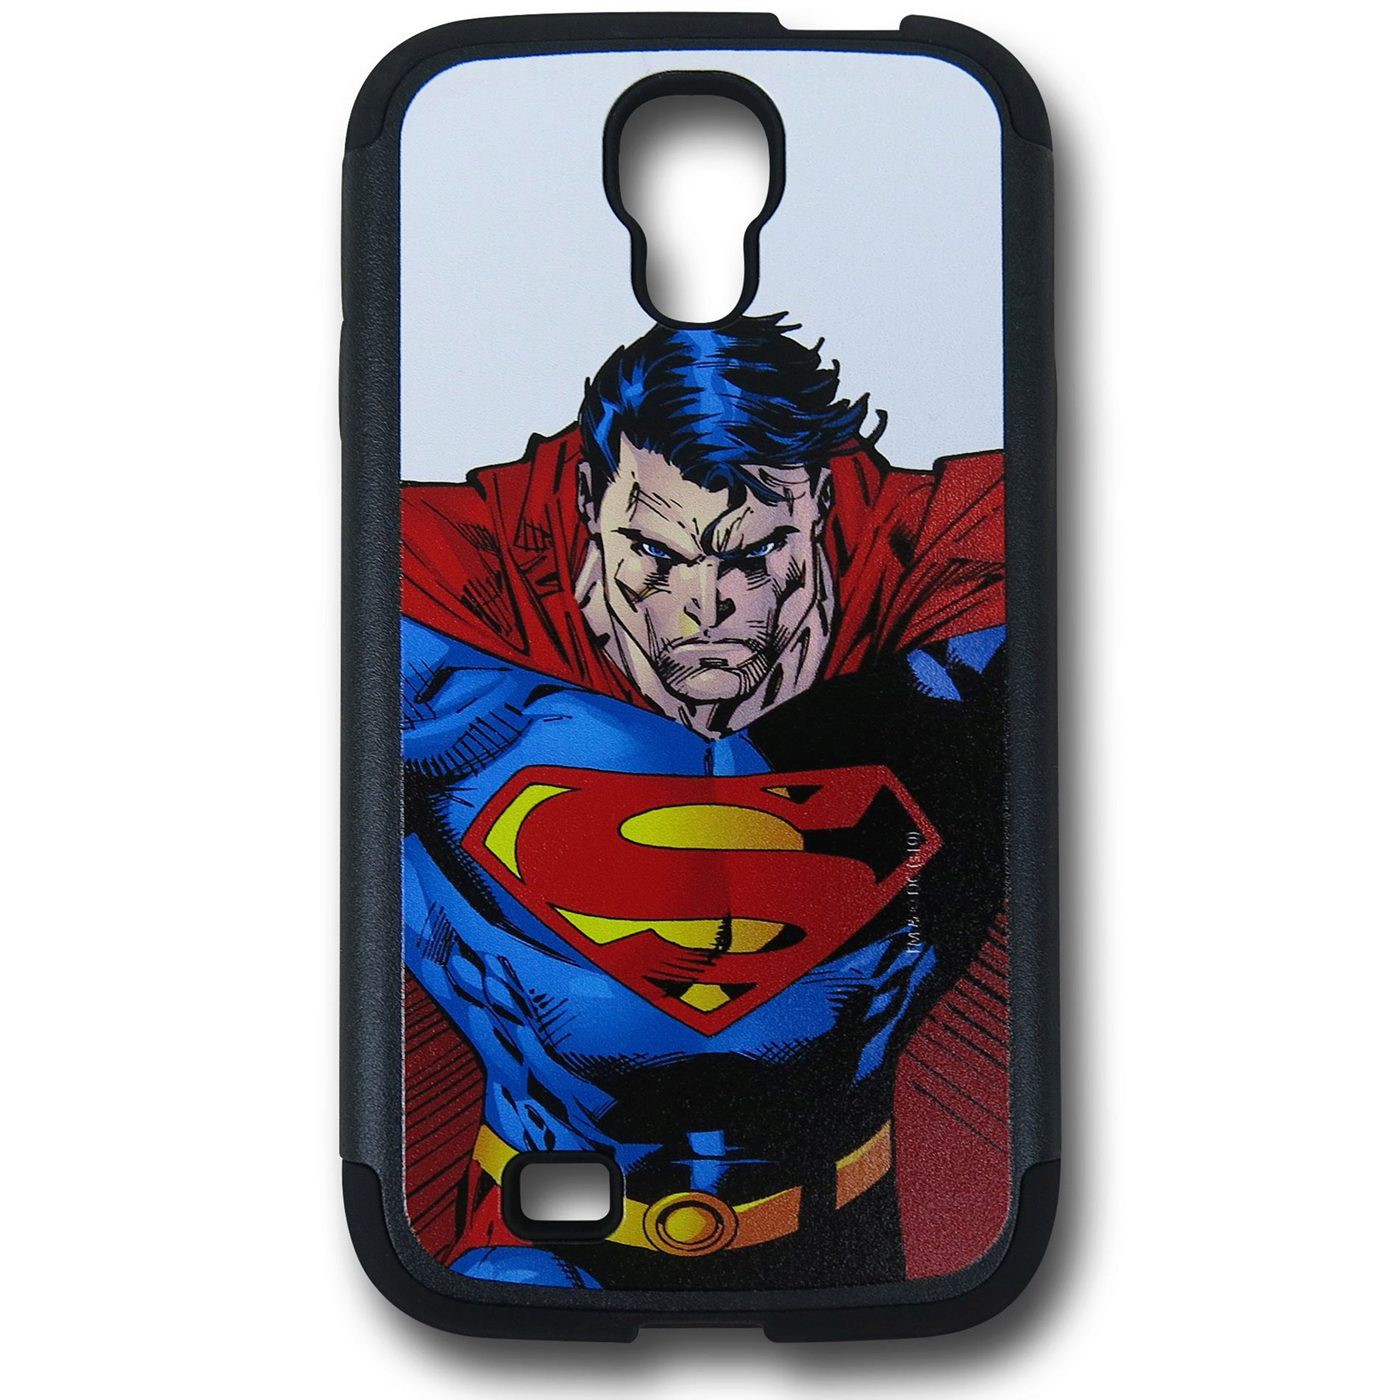 Superman Angry Face Galaxy S4 Black Guardian Case